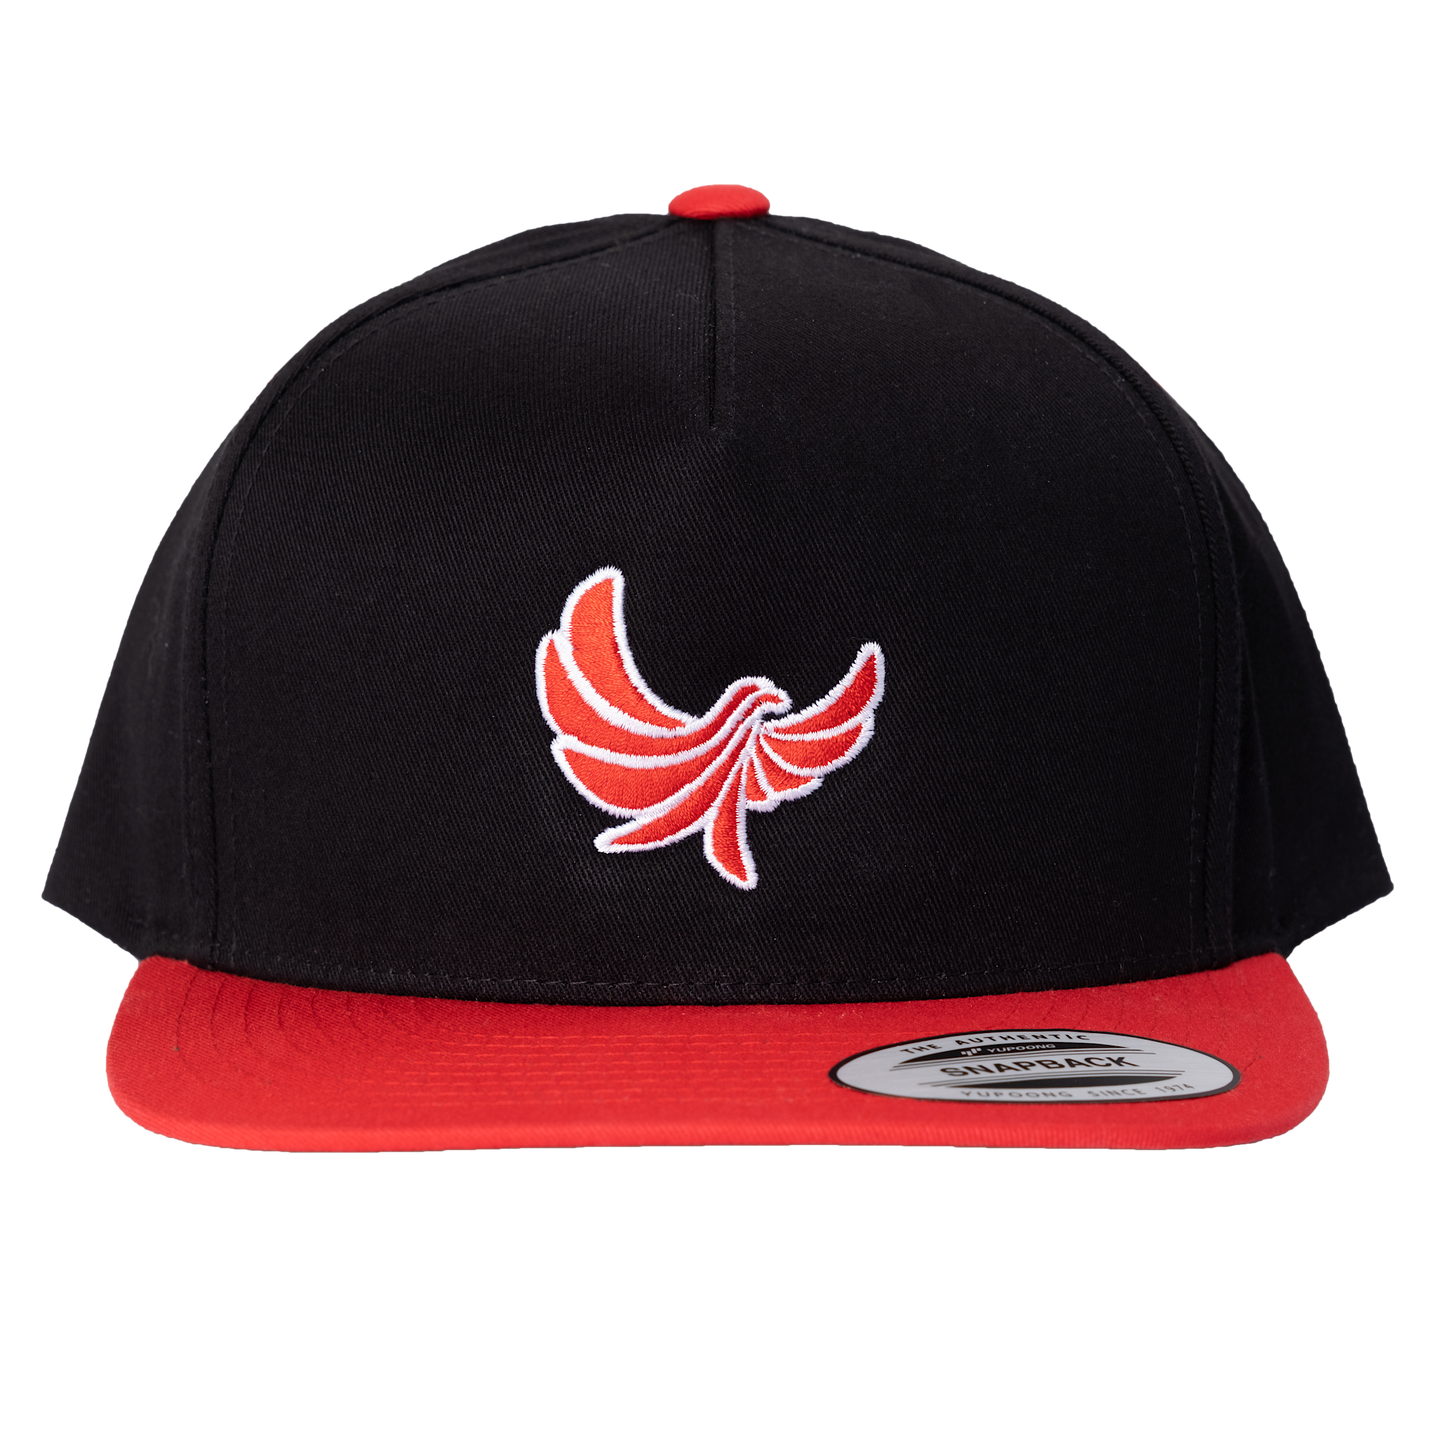 Red and Black High Profile 5 Panel Snap-Back Flat Bill Cap